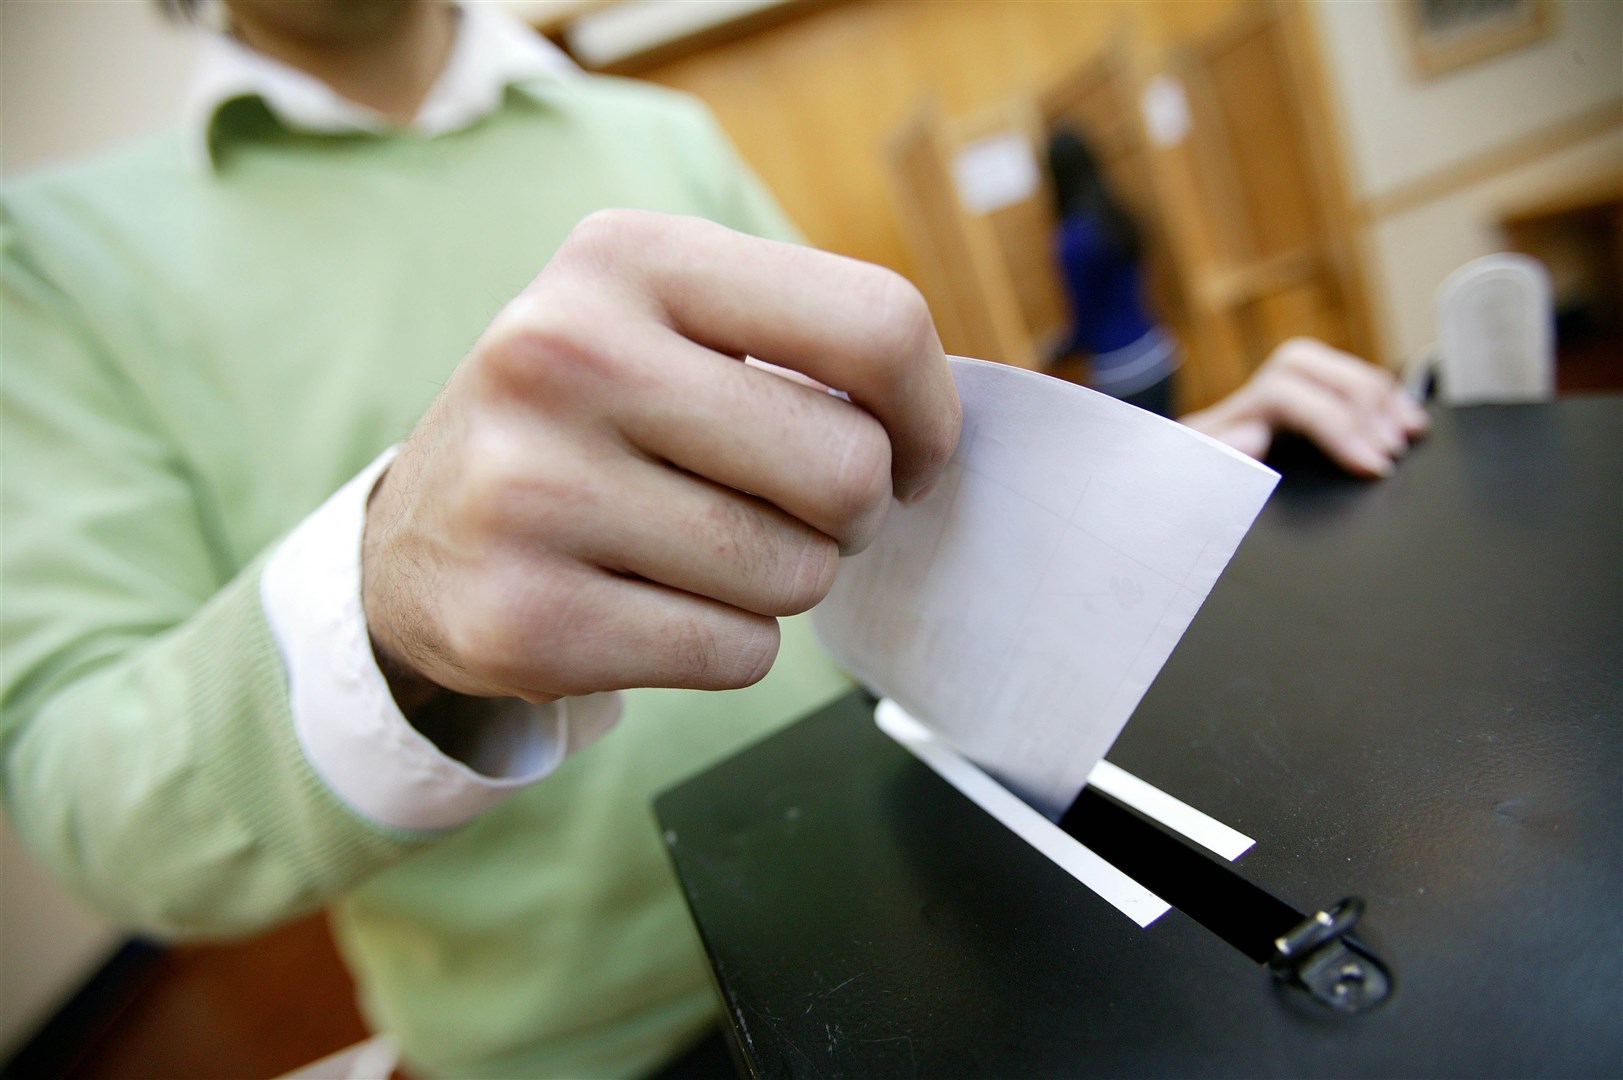 People who want to vote in the Scottish elections have until Monday to register.